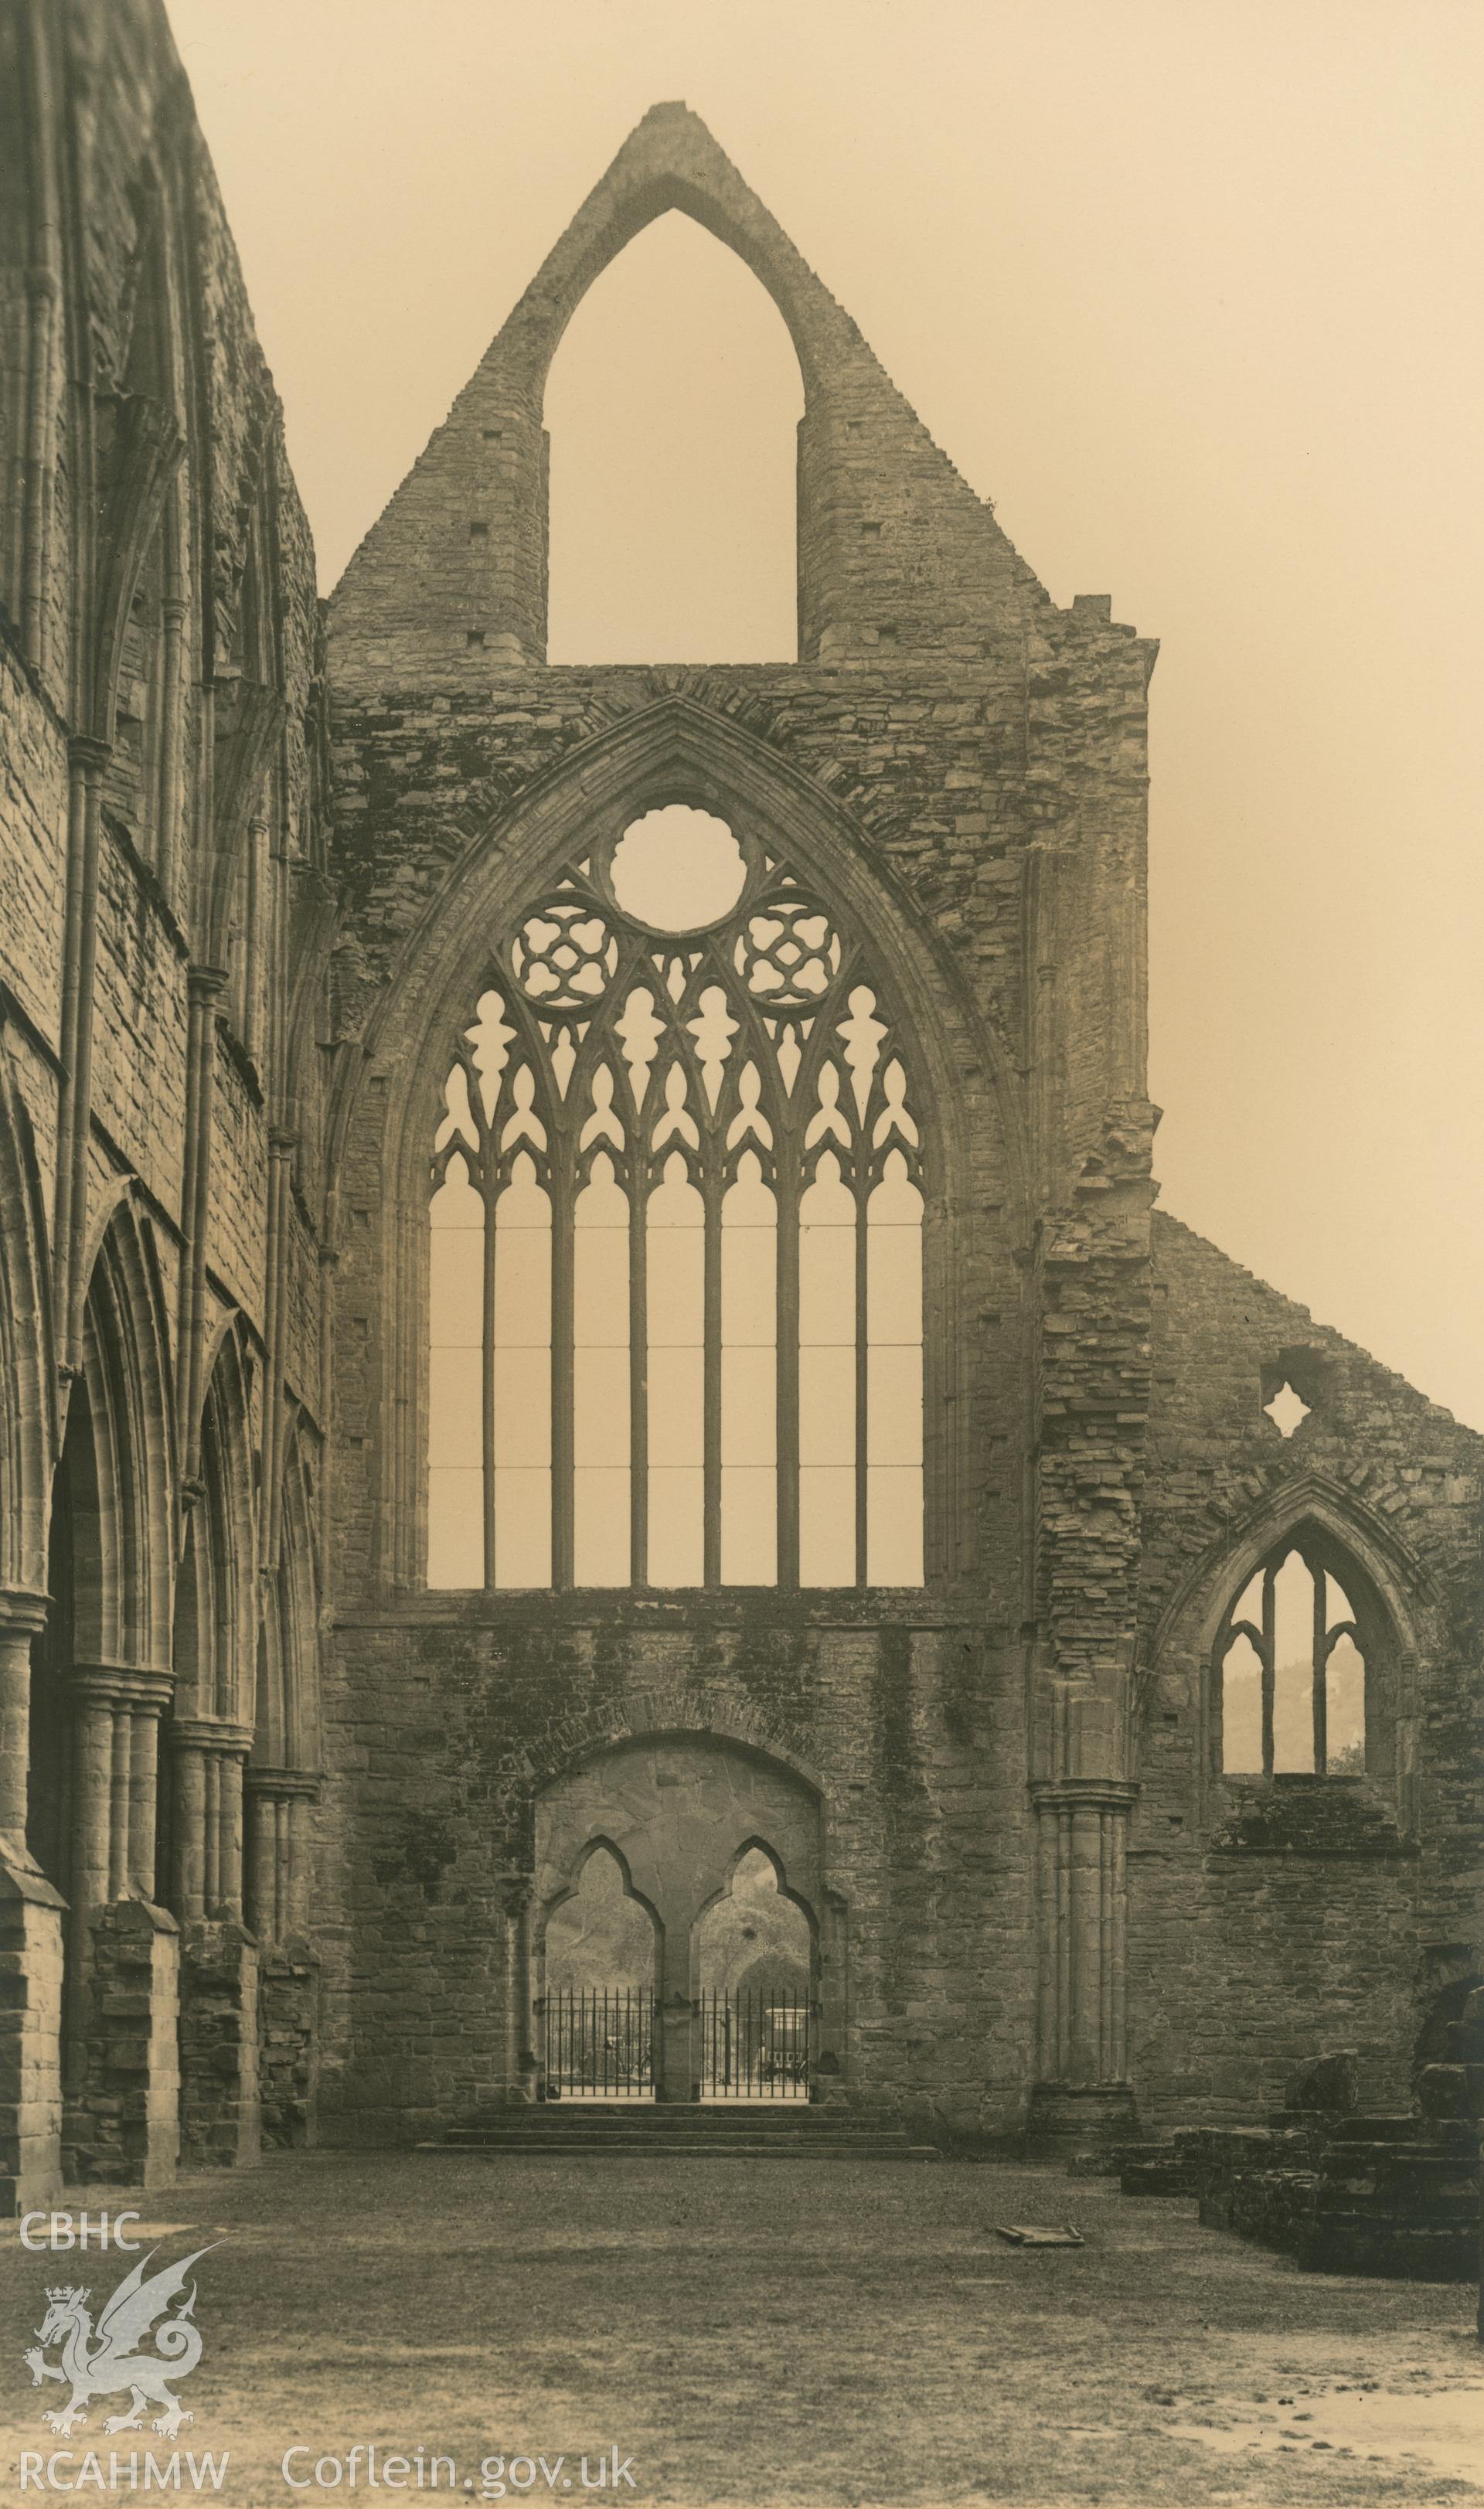 Digital copy of an albumen print showing a view of the nave looking west at Tintern Abbey.